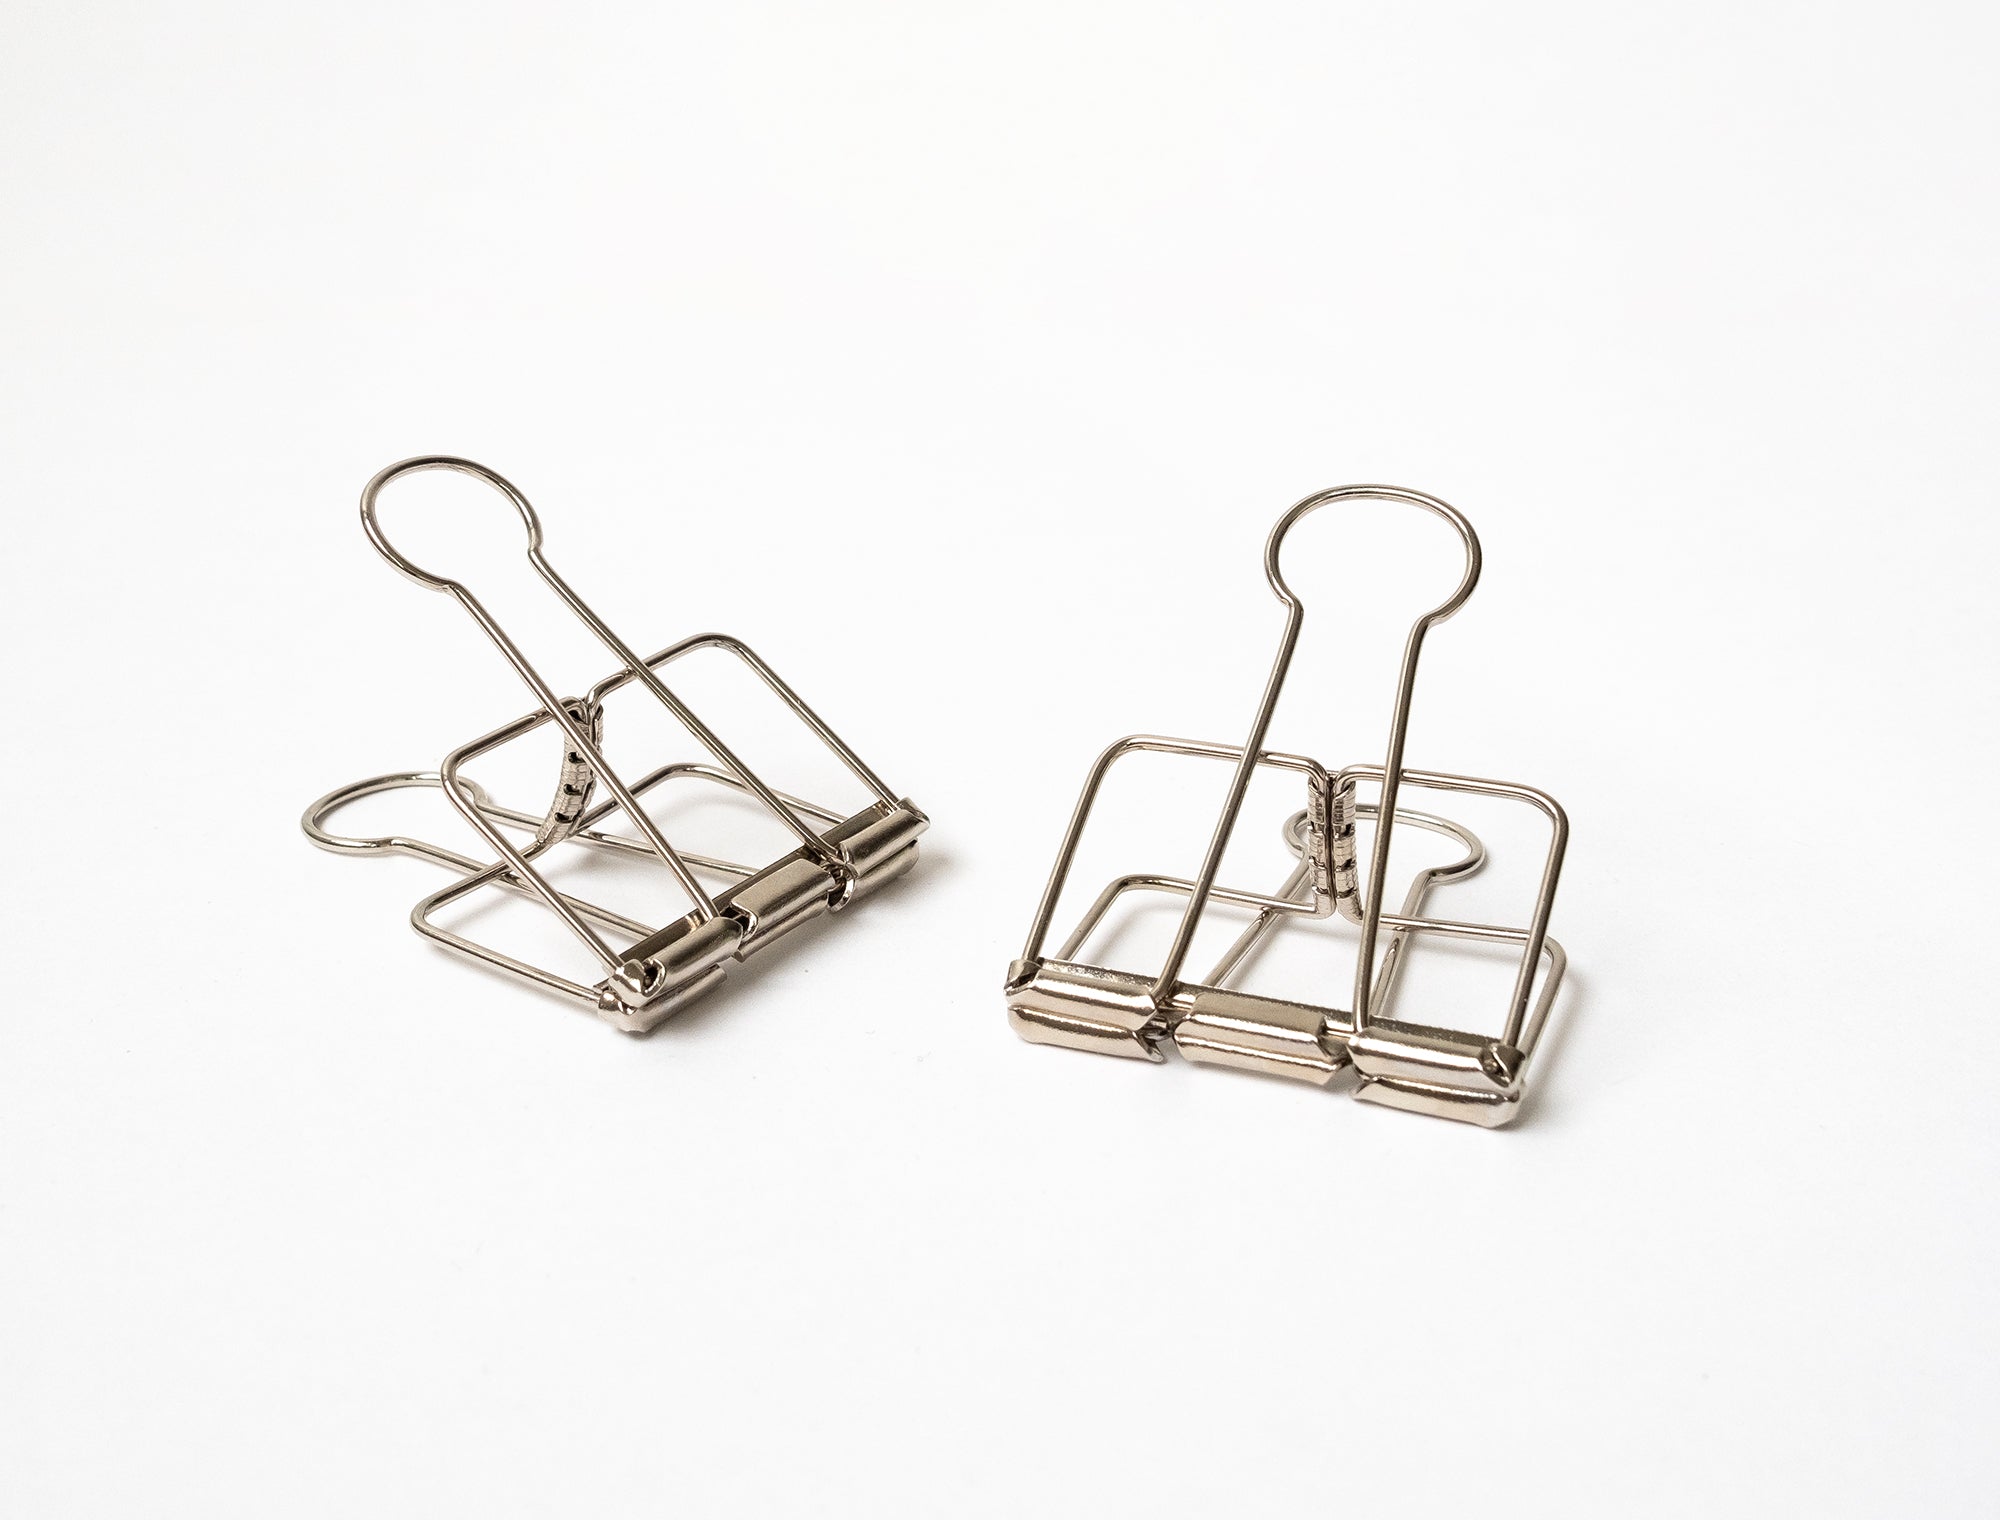 Stainless Steel Paper Clips - Hollinger Metal Edge